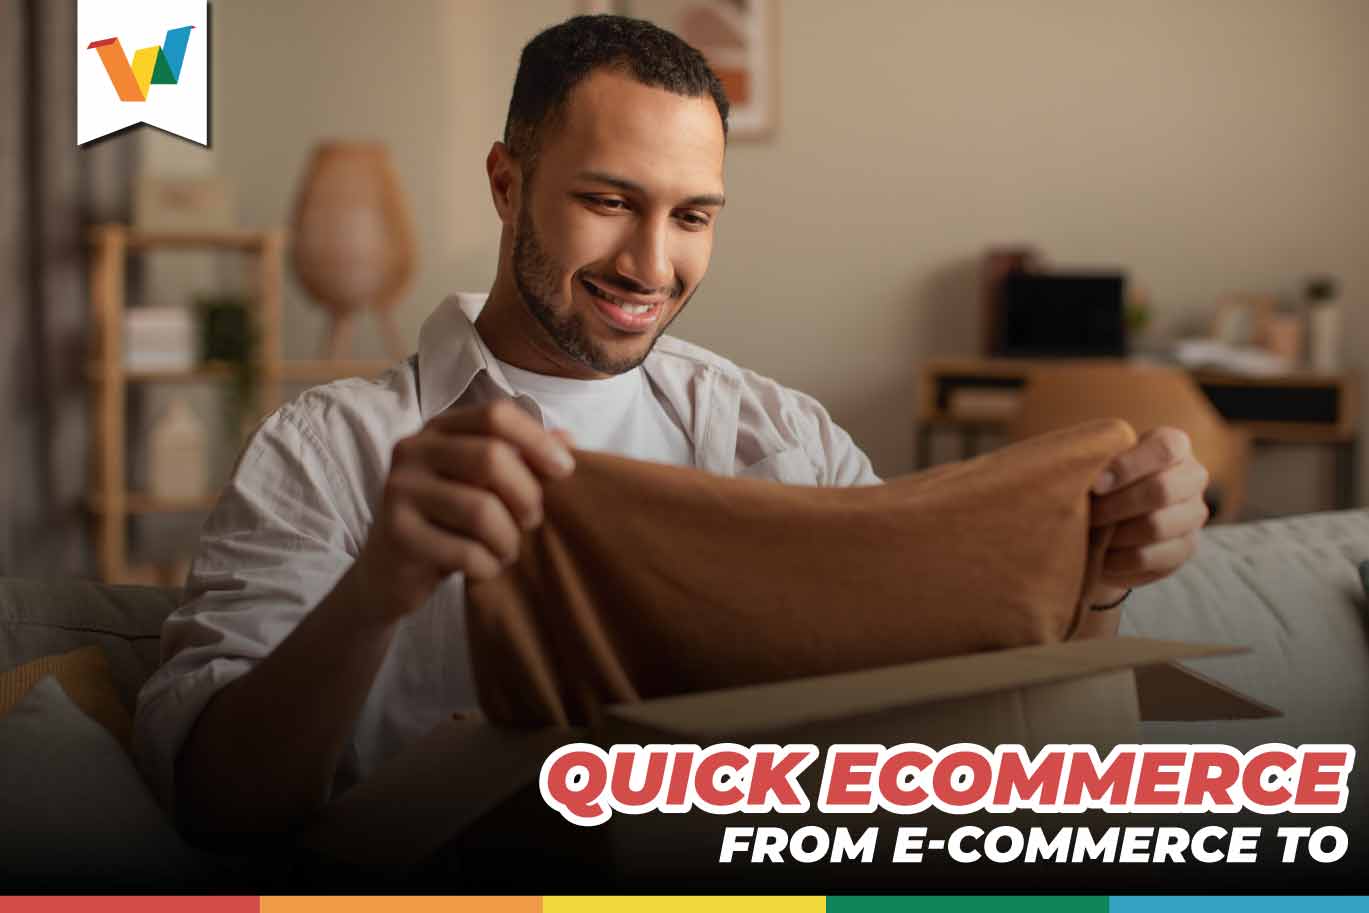 From E-Commerce to Quick eCommerce